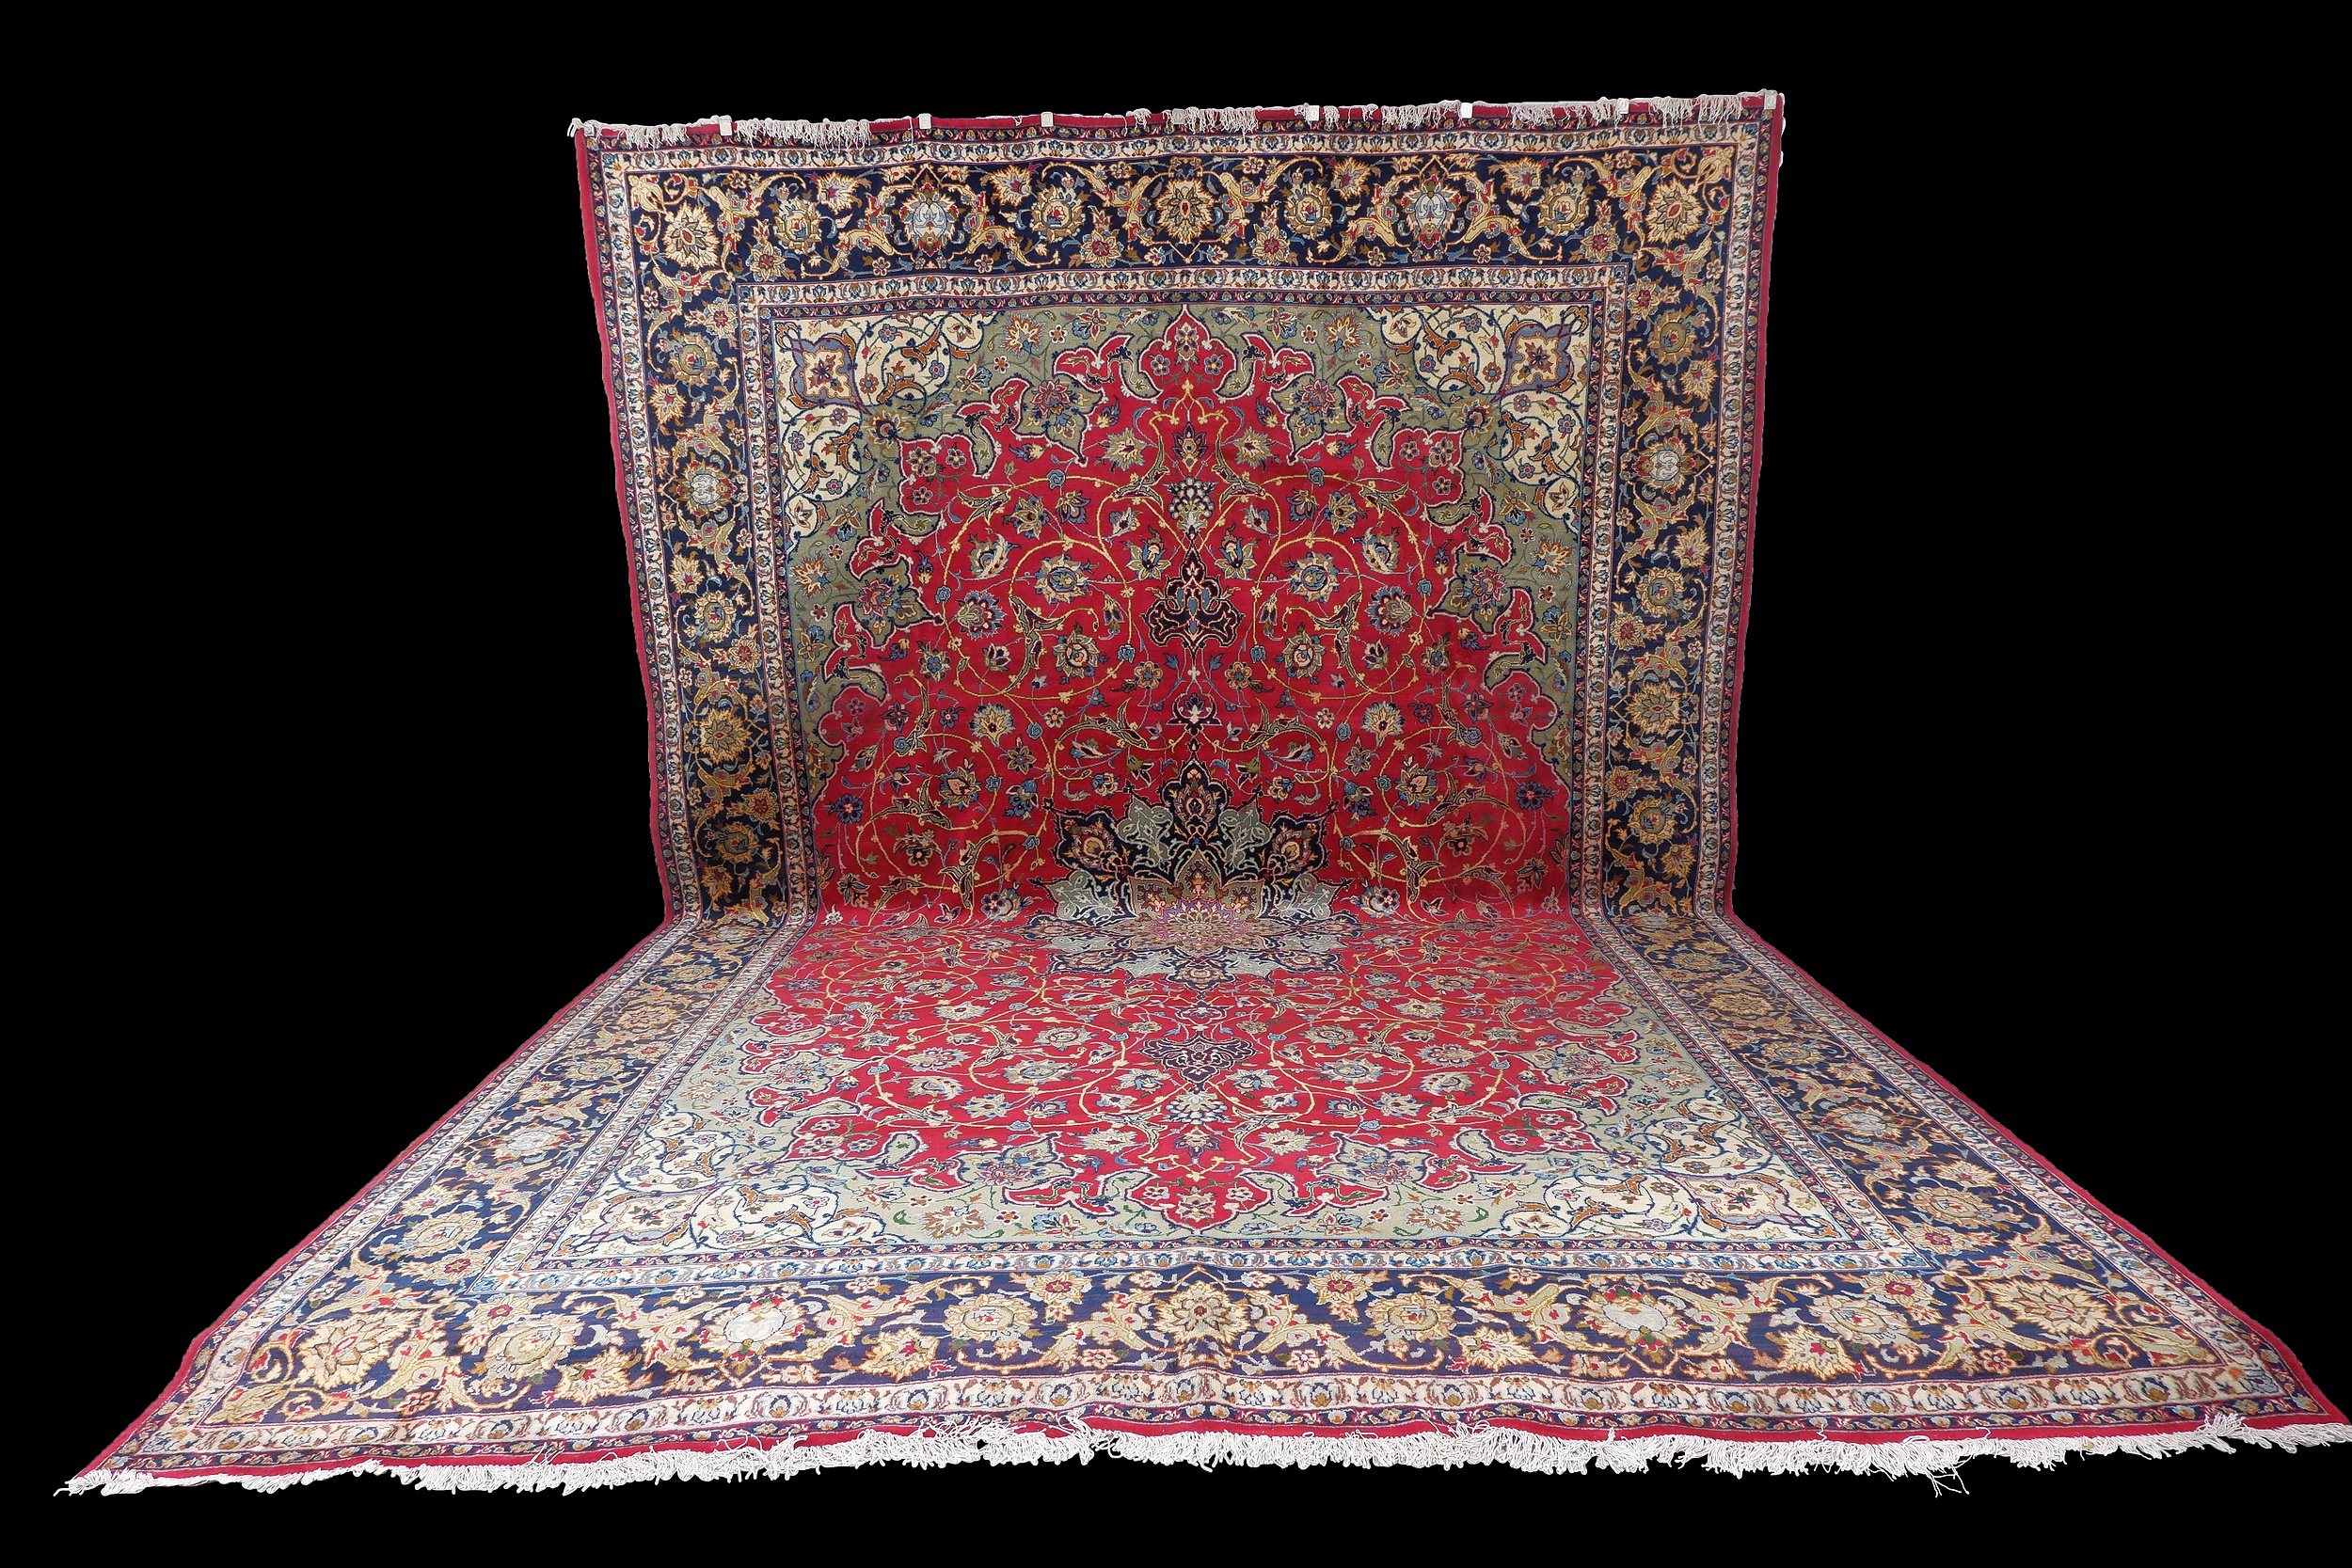 'Monumental Persian Tabriz Hand Knotted Wool Pile Room Sized Carpet with Central Medallion and Shah Abbas Field '